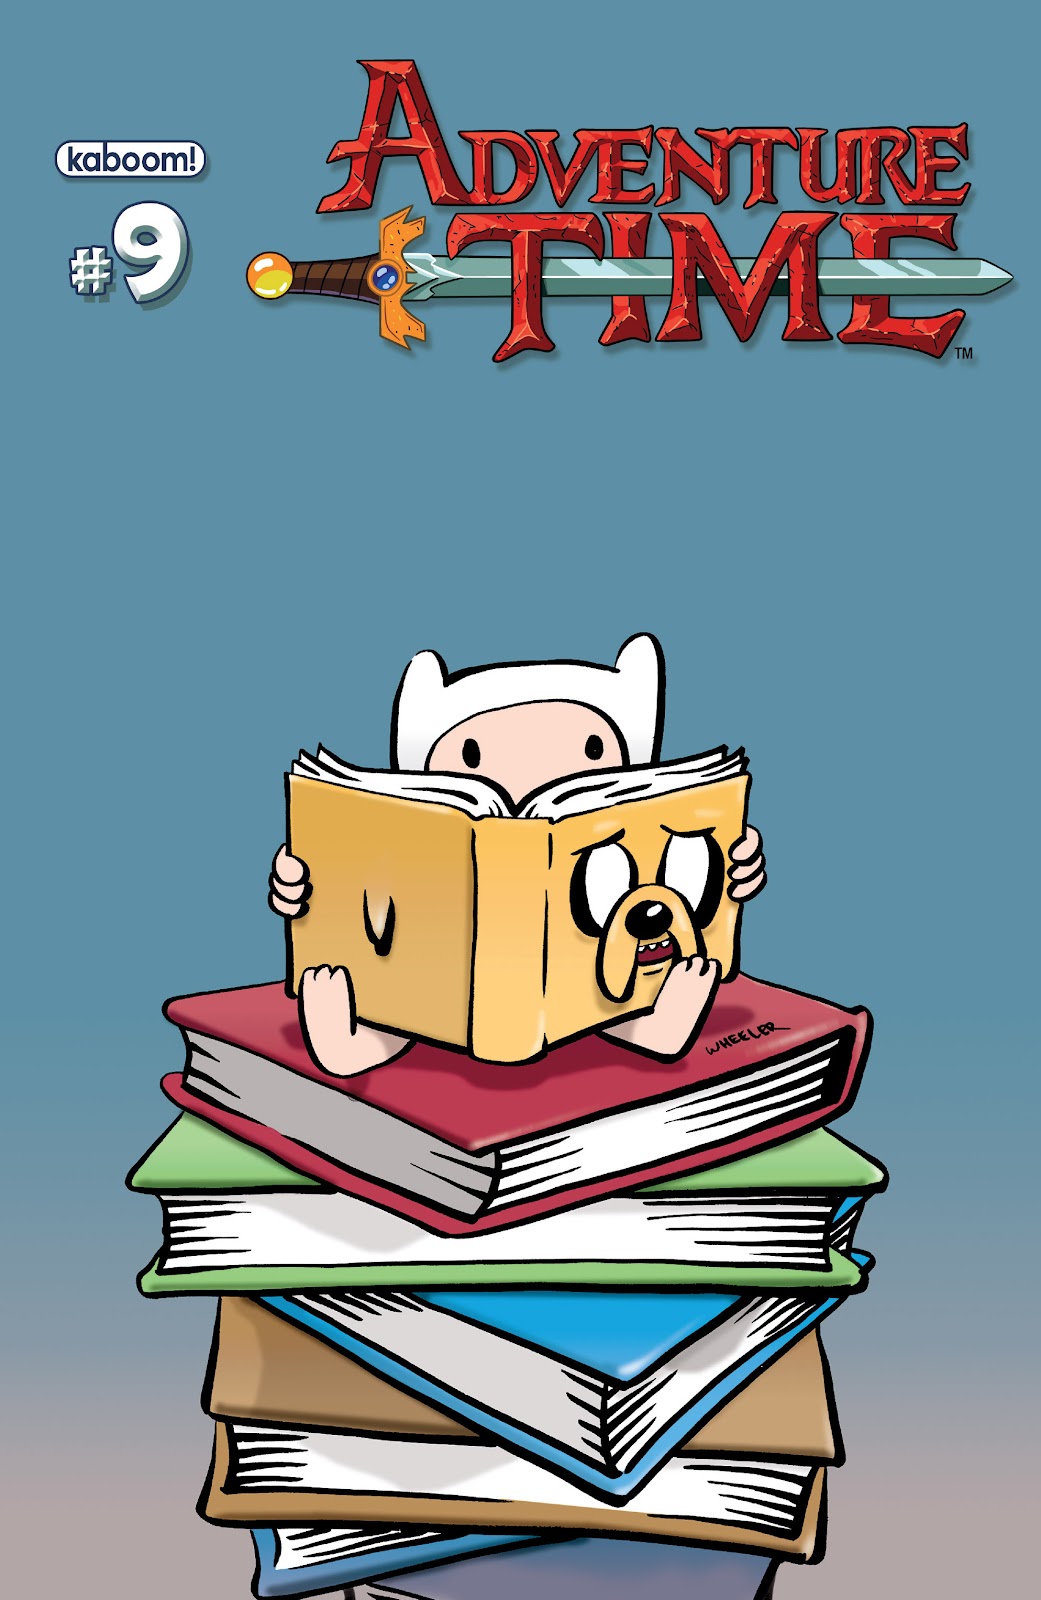 Adventure Time issue 9 - Page 2